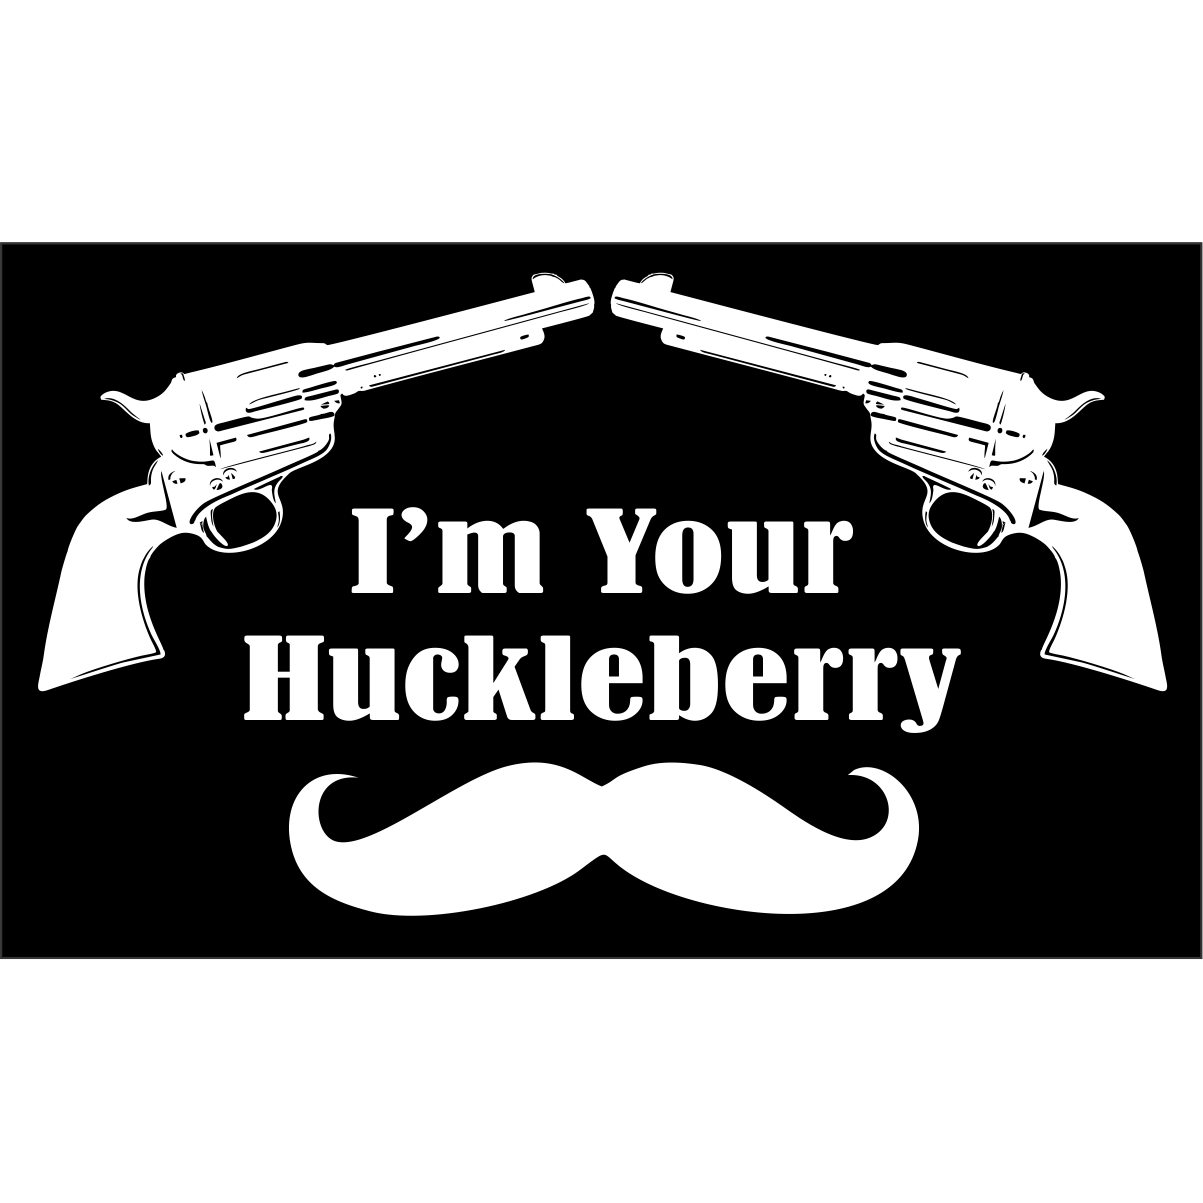 Tactical Gear Junkie Stickers I'm Your Huckleberry  - 4x2.5 inch Sticker